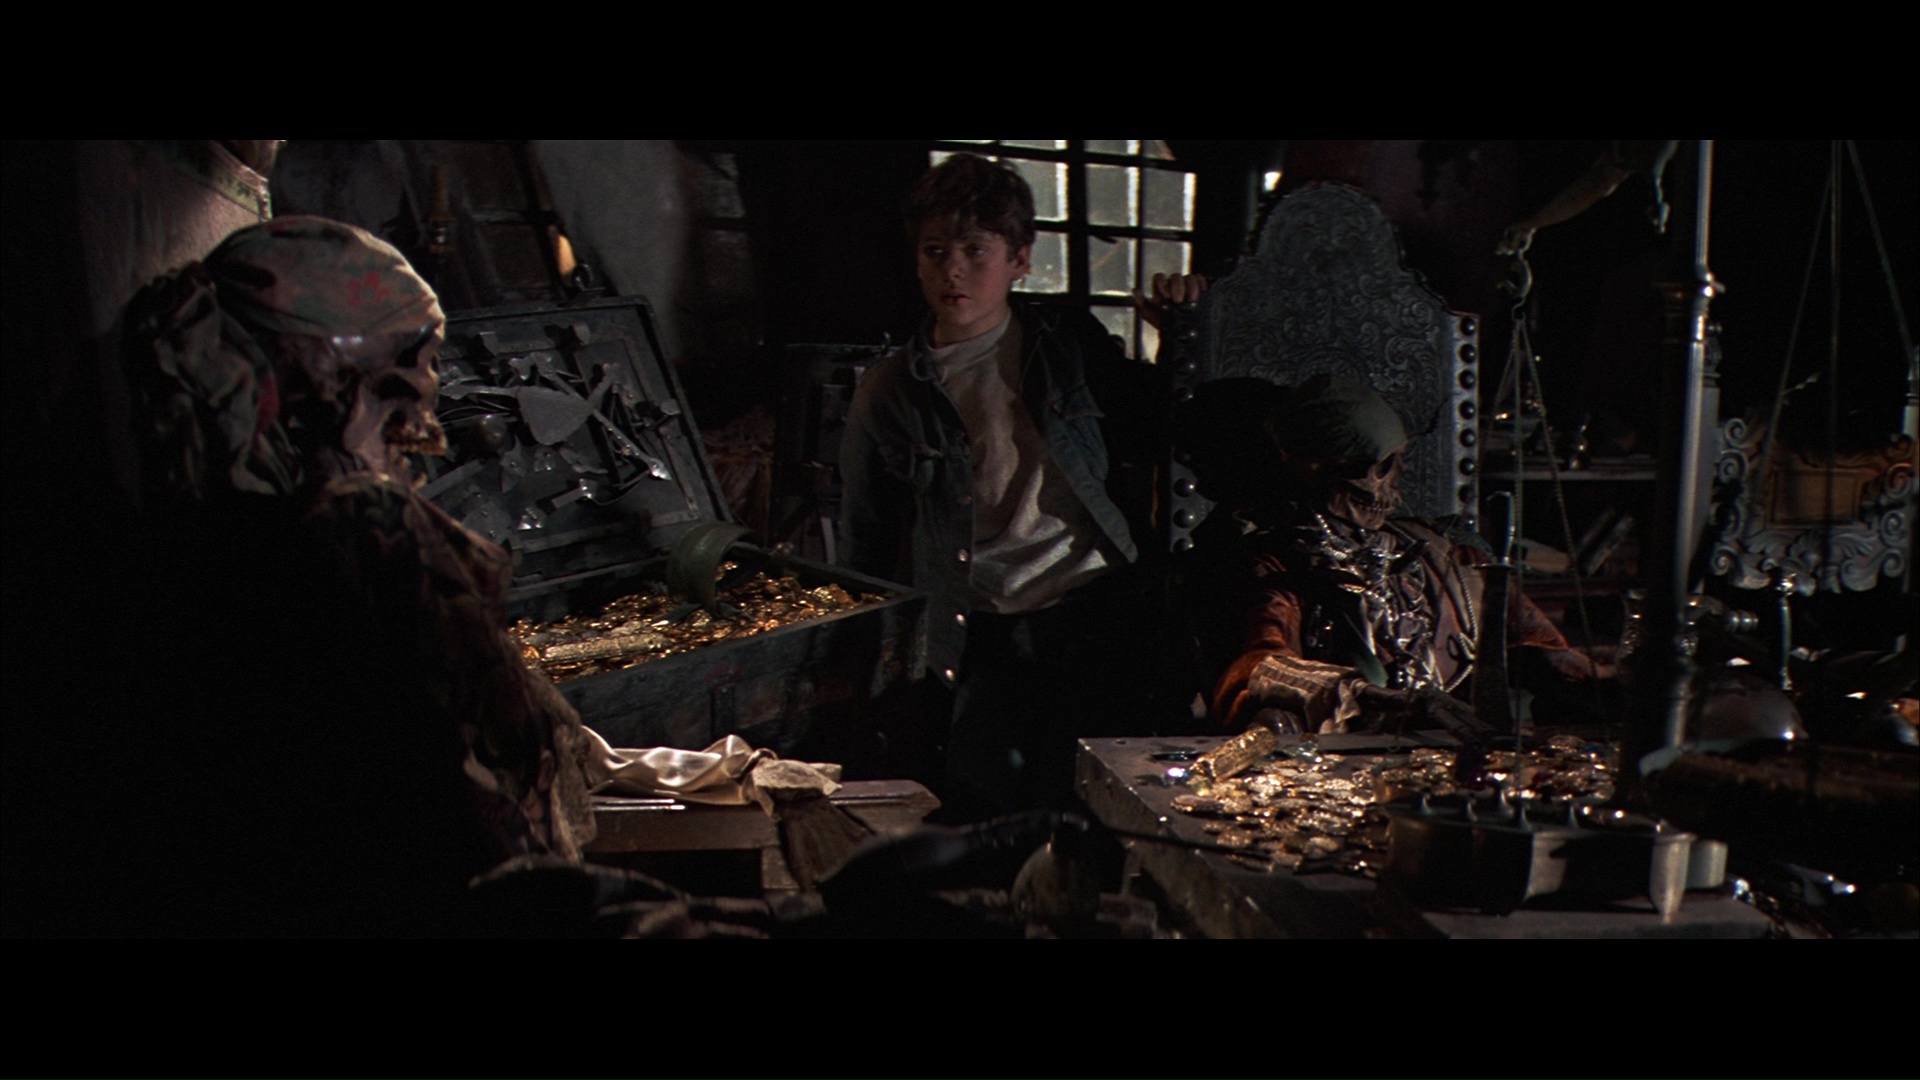 THE GOONIES (1985) - Assorted One-Eyed Willy's Treasure - Image 7 of 11